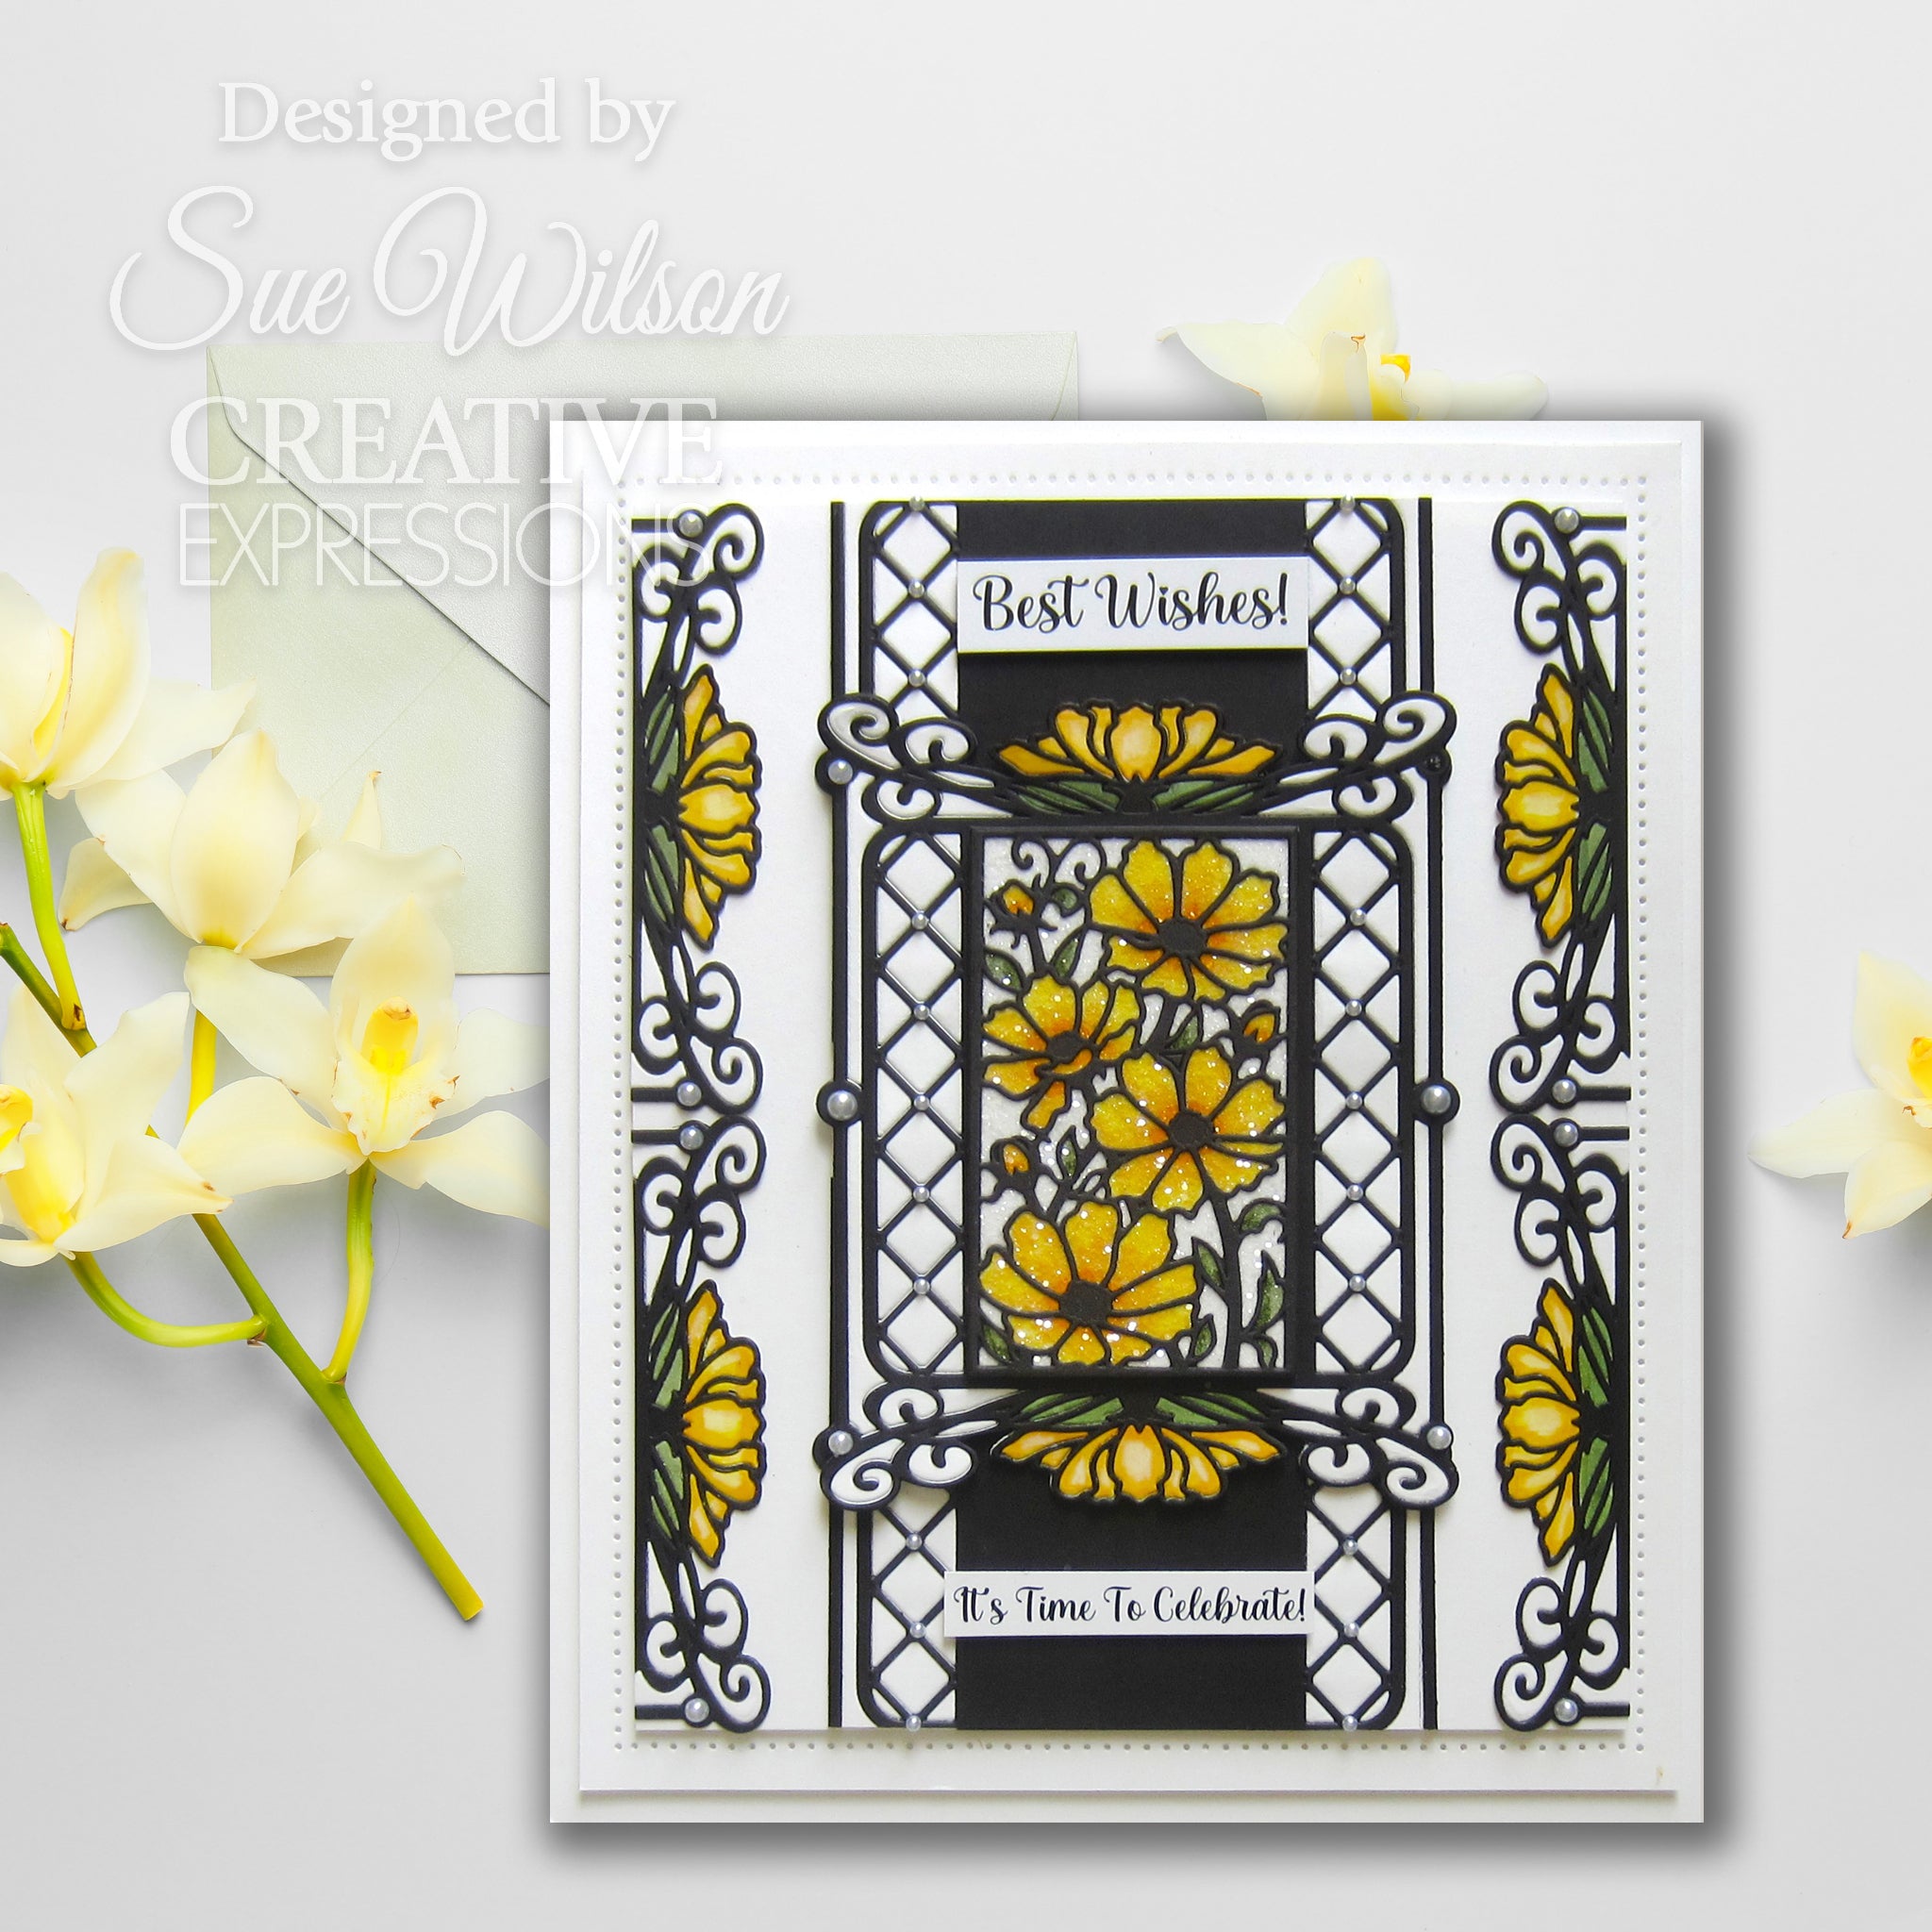 Creative Expressions Sue Wilson Frames & Tags Lena Craft Die